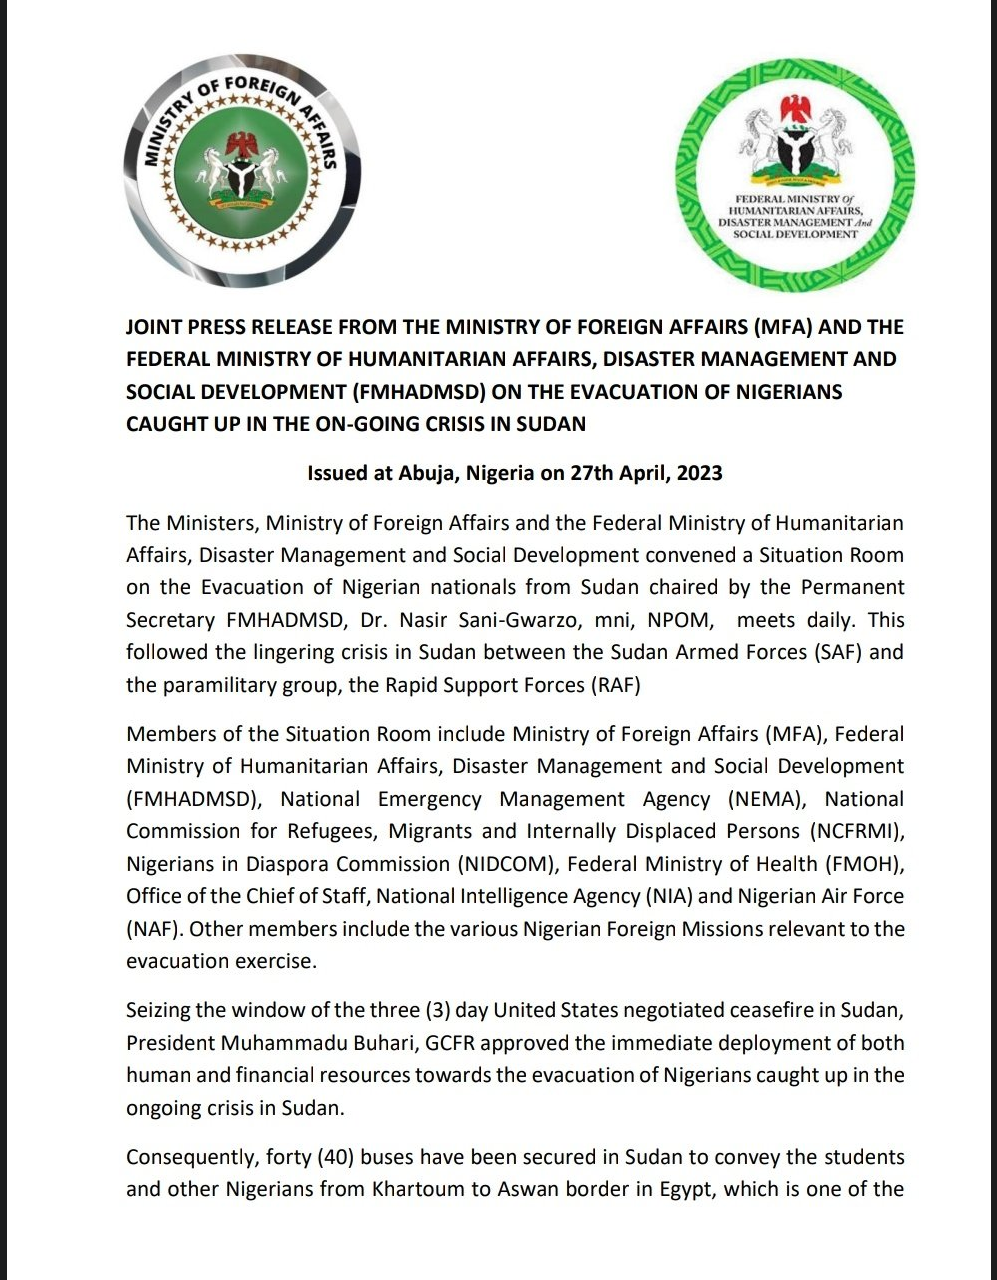 Statement from Ministry on Nigerian Students being evacuated from Sudan